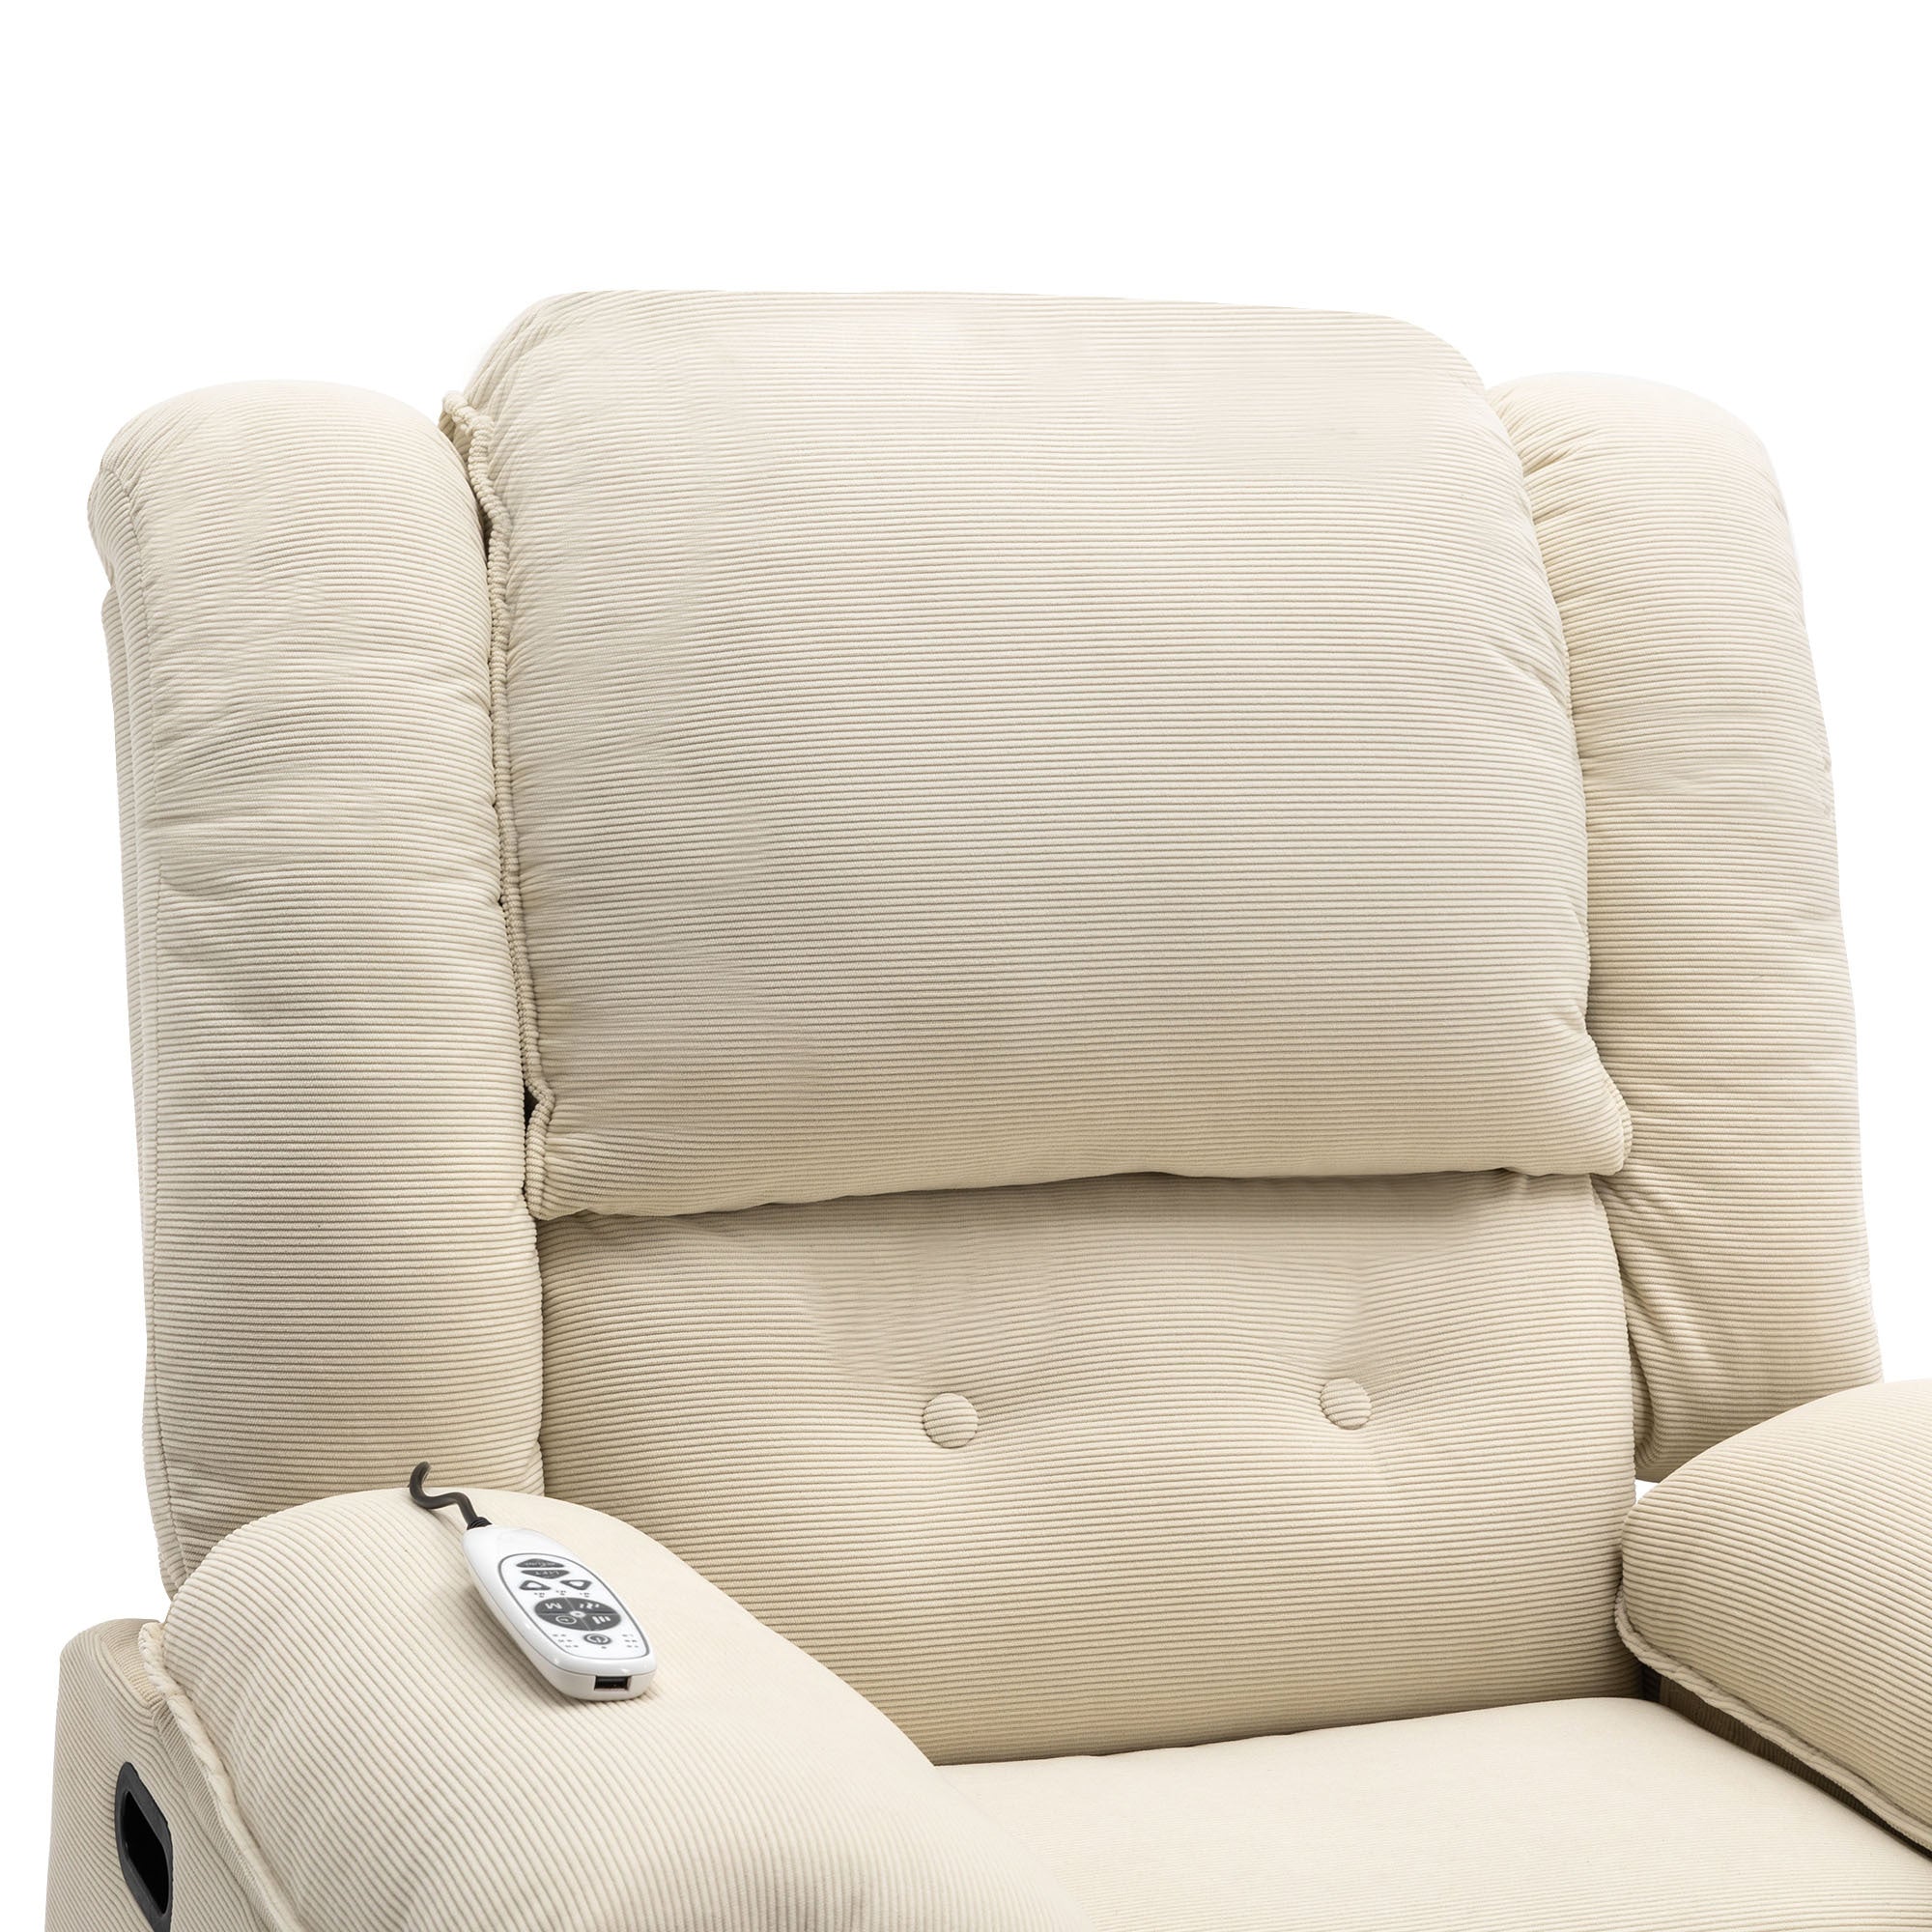 Beige Power Lift Chair with Adjustable Massage and Heat, close up of headrest